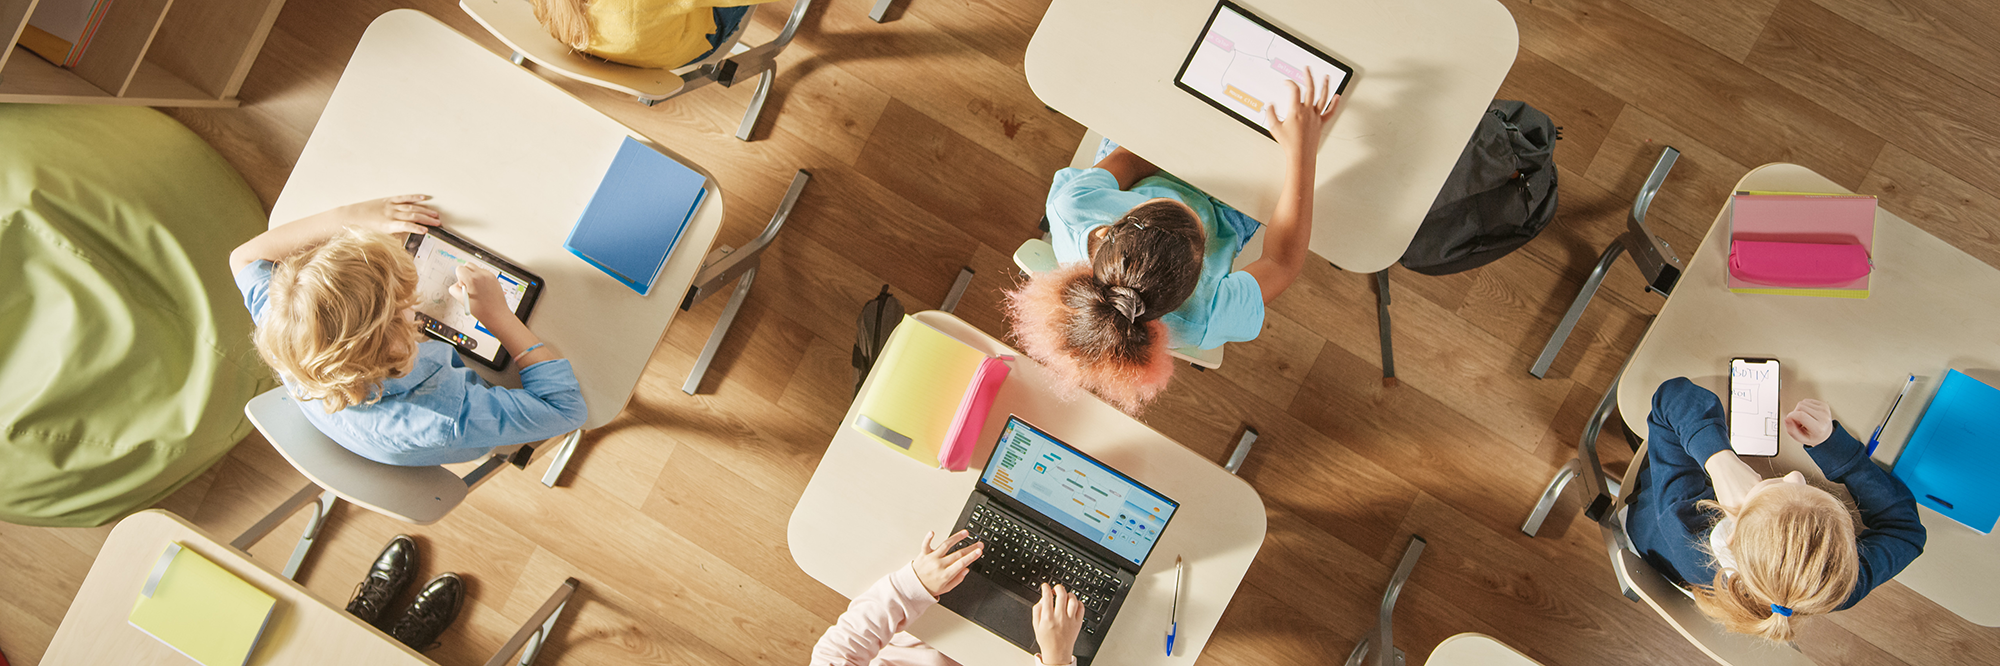 children at their desks with devices | The Digital Classroom